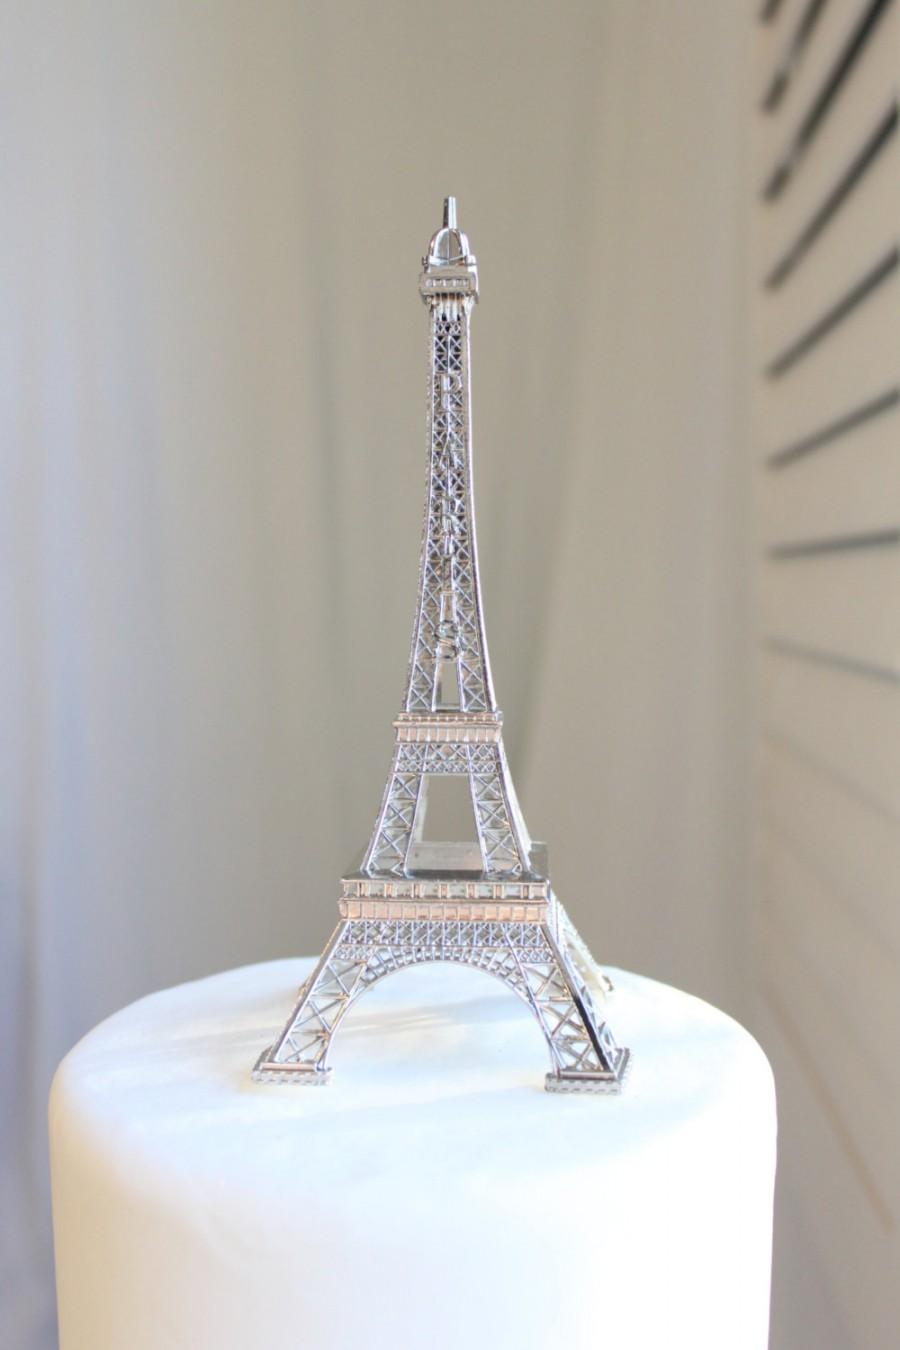 6 Silver Paris Eiffel Tower Cake Topper Madeline France